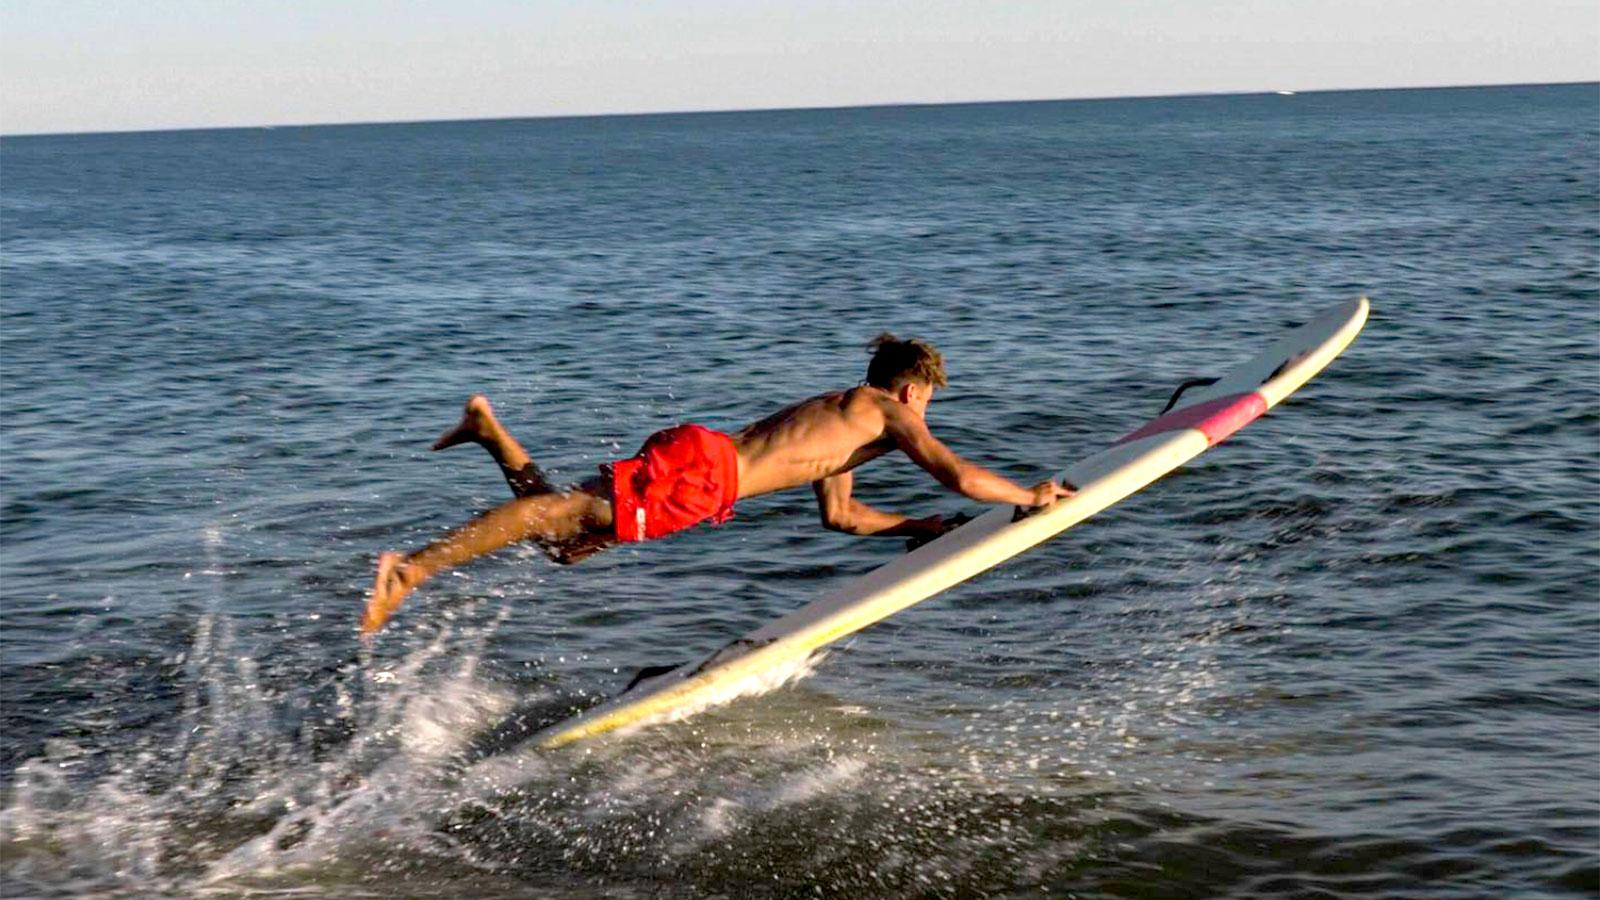 Lifeguard jumping onto longboard to save swimmer